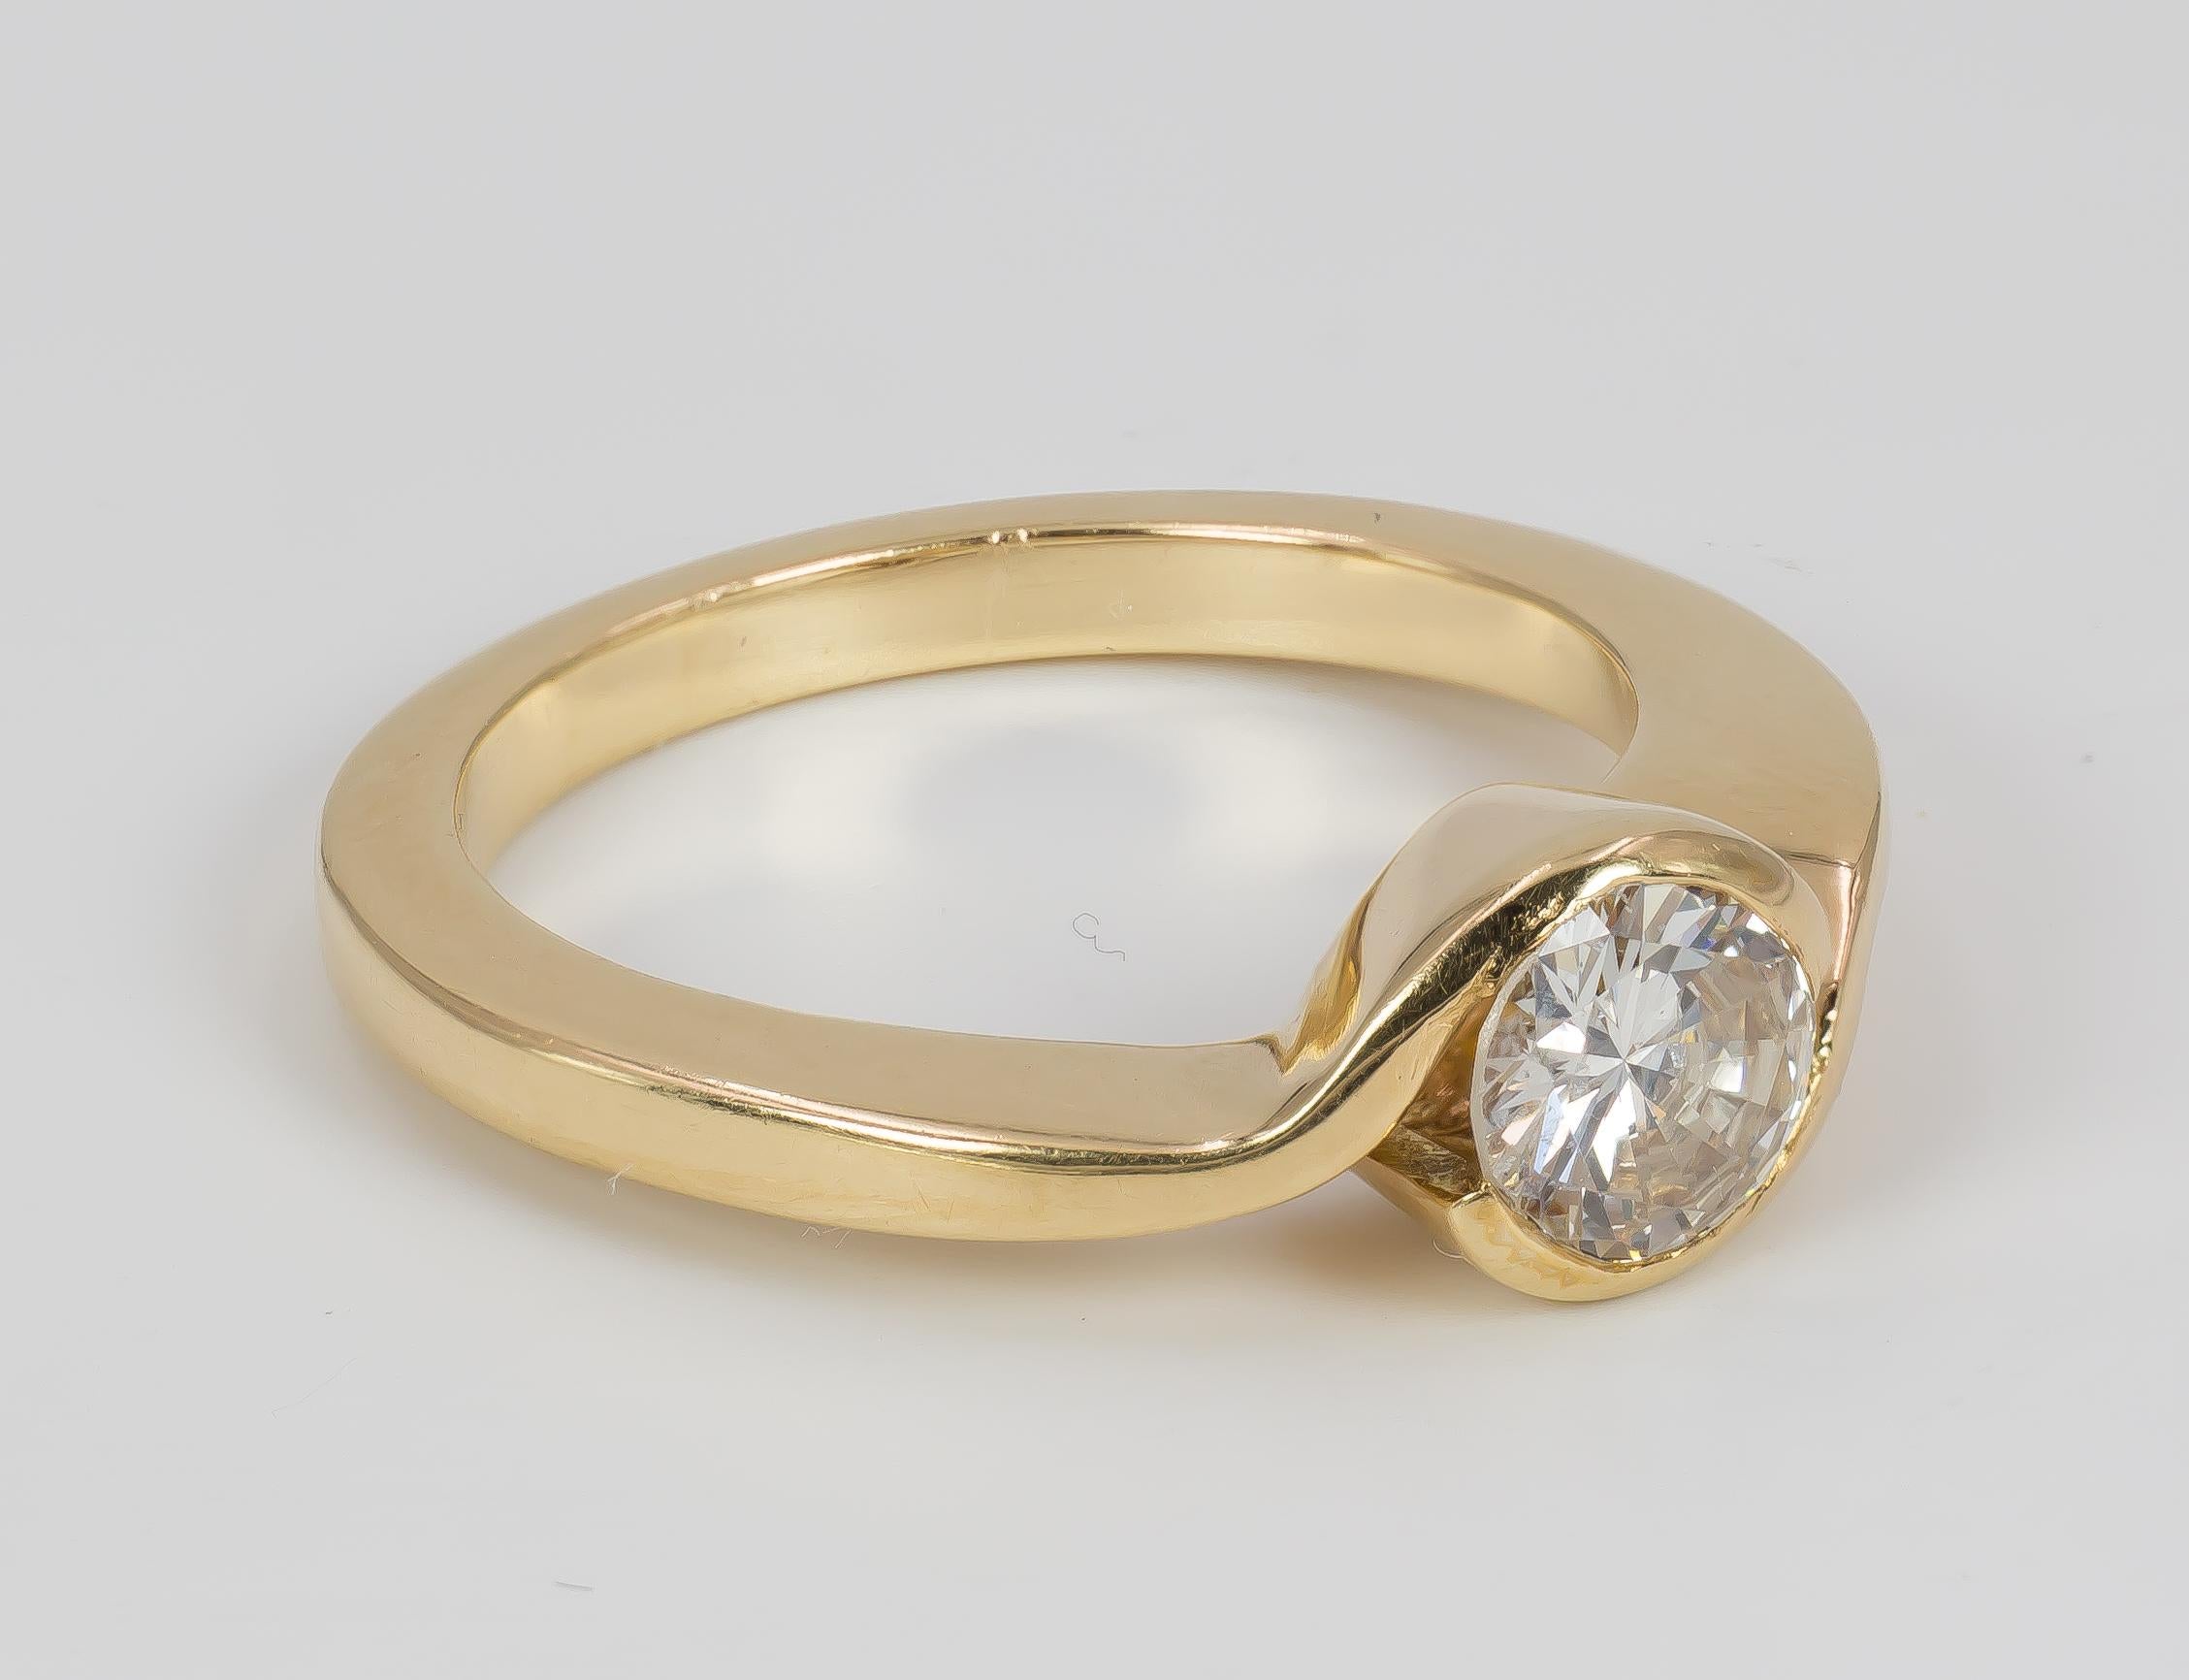 This particular solitaire ring is crafted in 18K gold throughout, and it is set with a central 0.7ct round cut diamond. The ring dates from the 1970s.

MATERIALS
18K gold and one 0.7ct round cut diamond

RING SIZE
6½ US (resizable)

WEIGHT
5.5 g